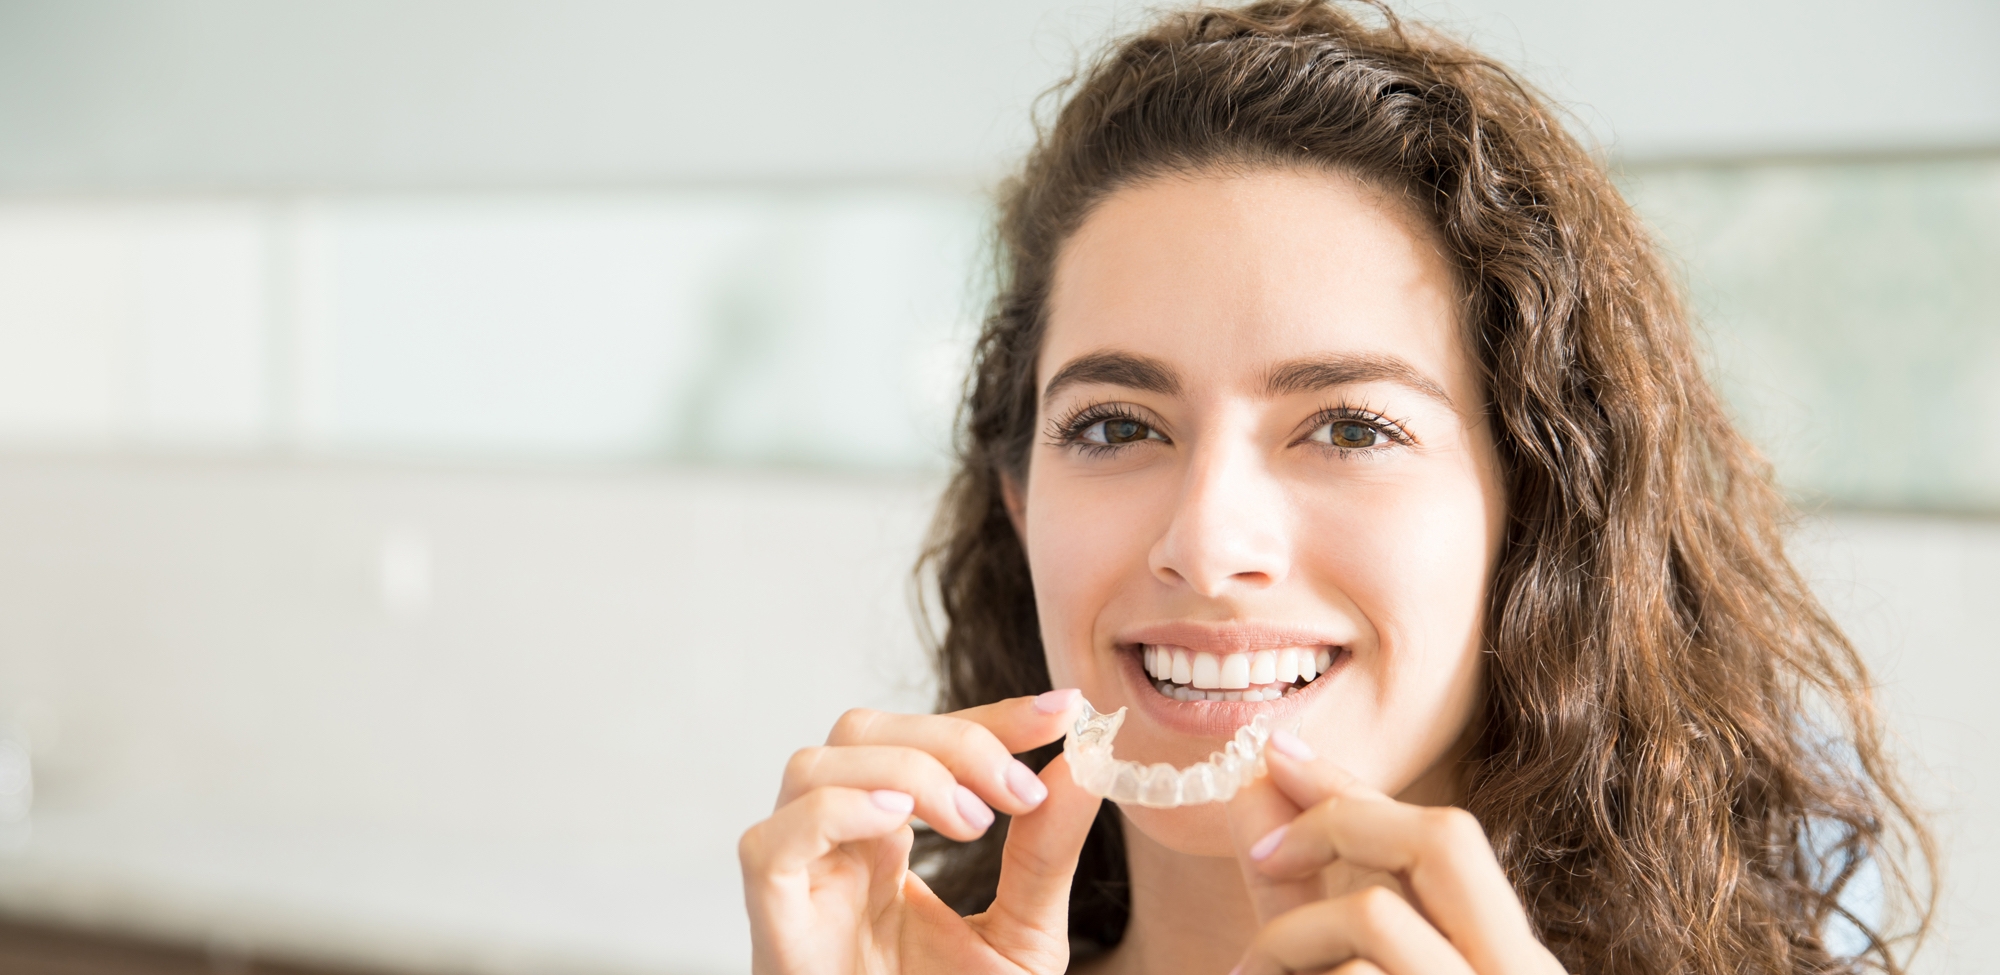 young woman smiling while holding invisalign treatment